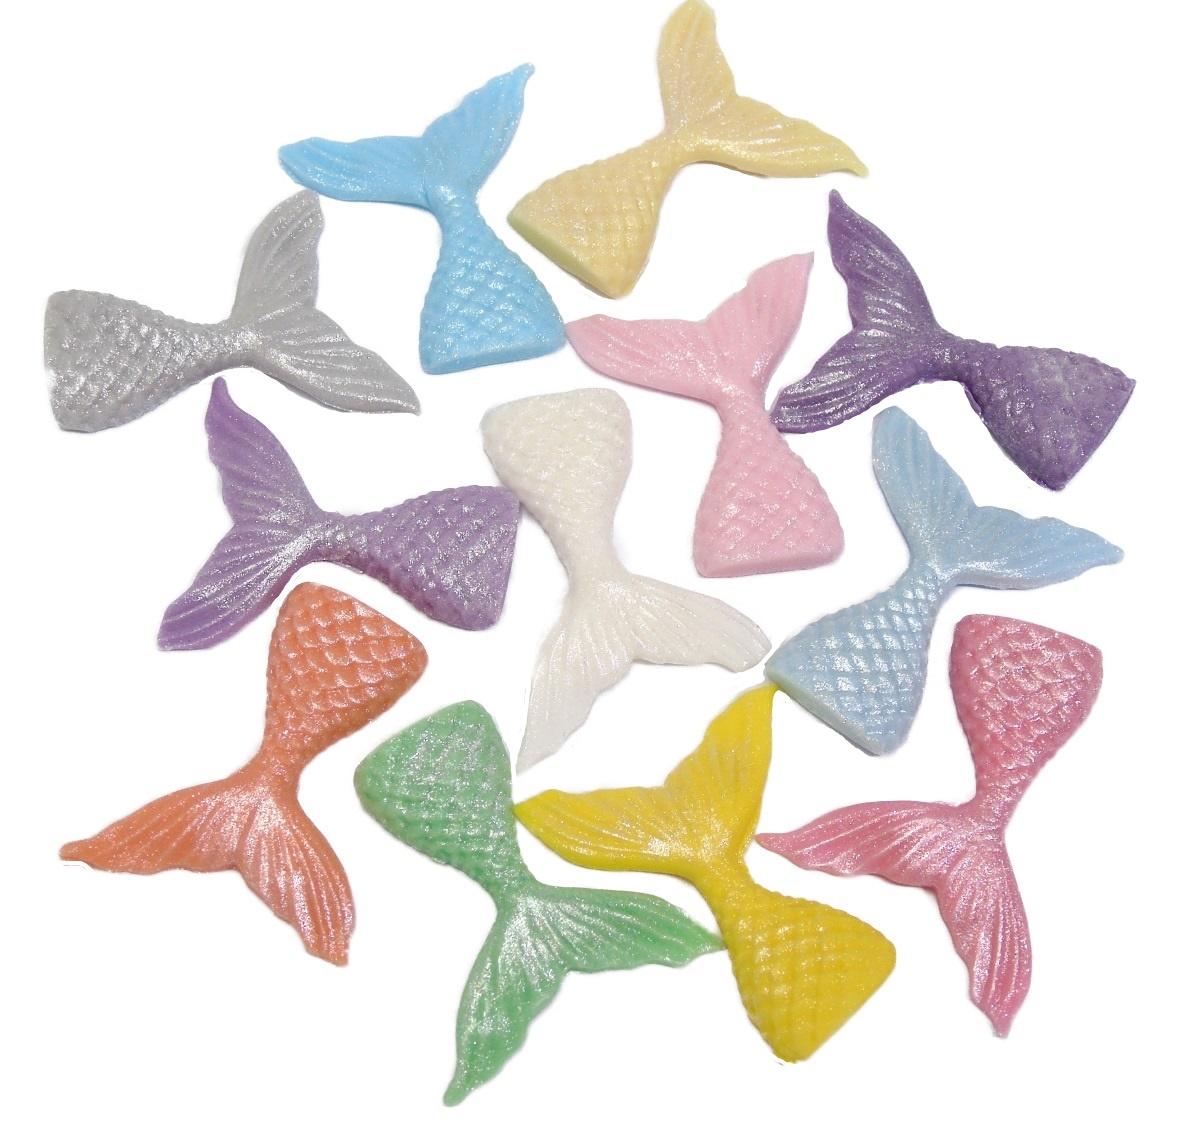 12 Edible Colourful Glittered Mermaid Tails Vegan, Dairy & Gluten Free cupcake toppers